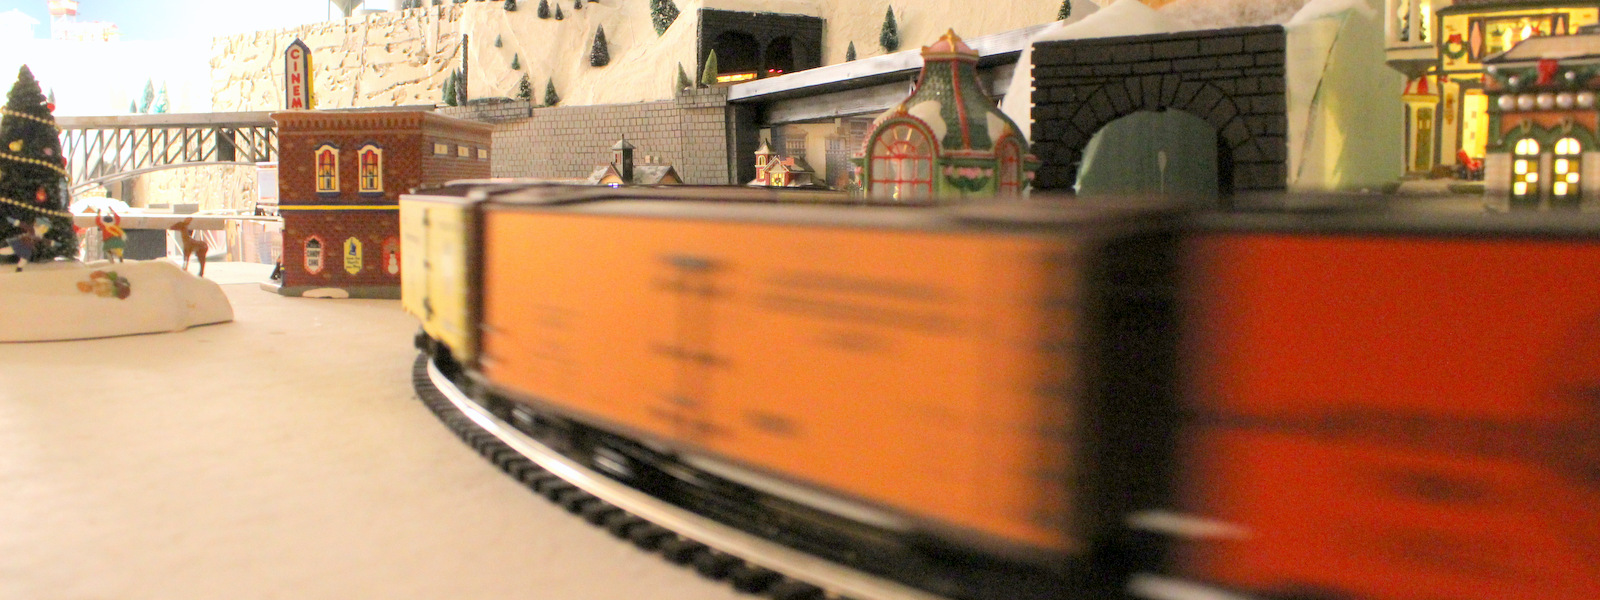 A train speeding by - Christmas at the Roundhouse" model train display.